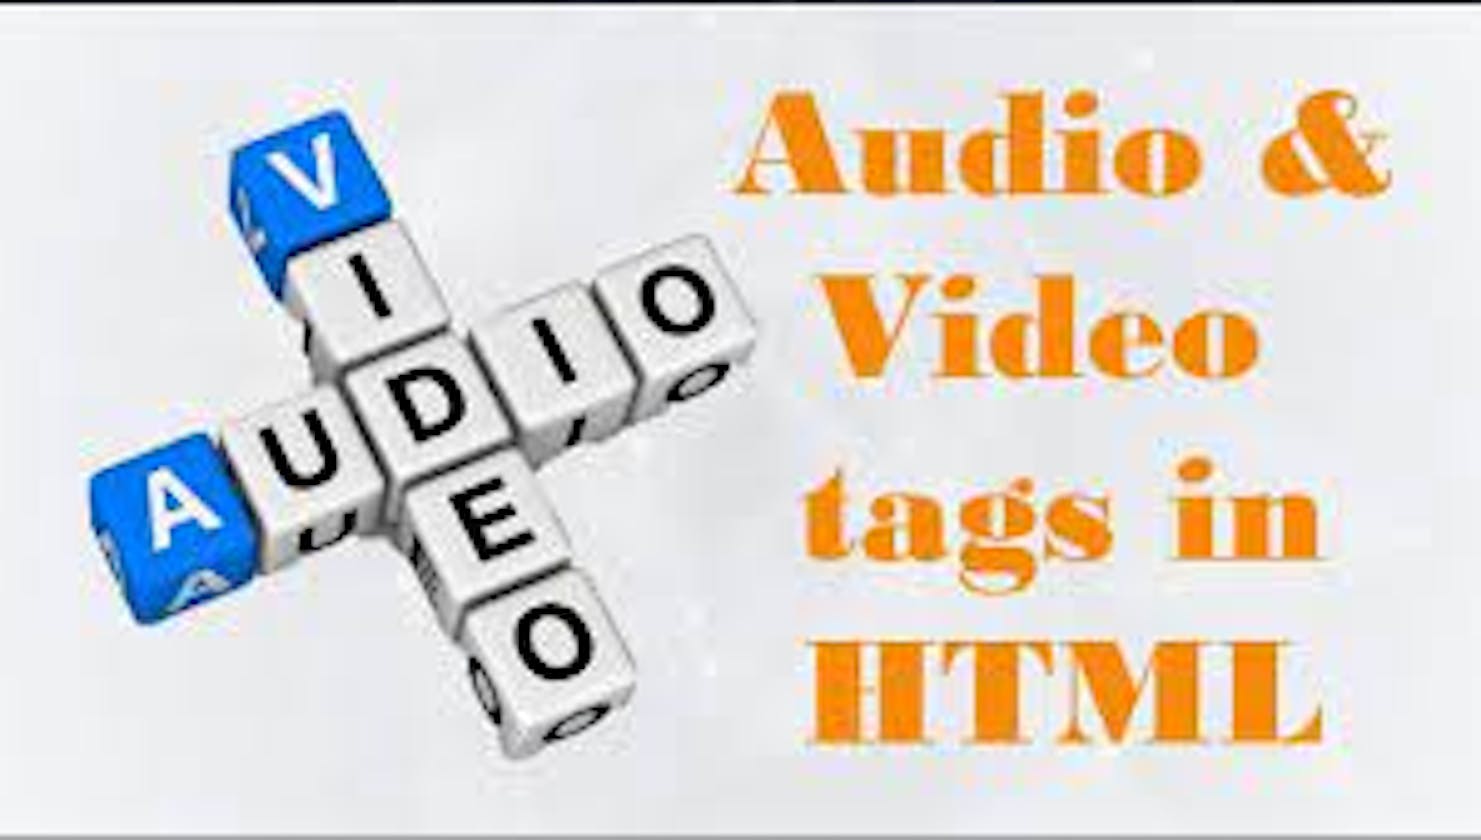 <Audio> and <Video> Tag in HTML